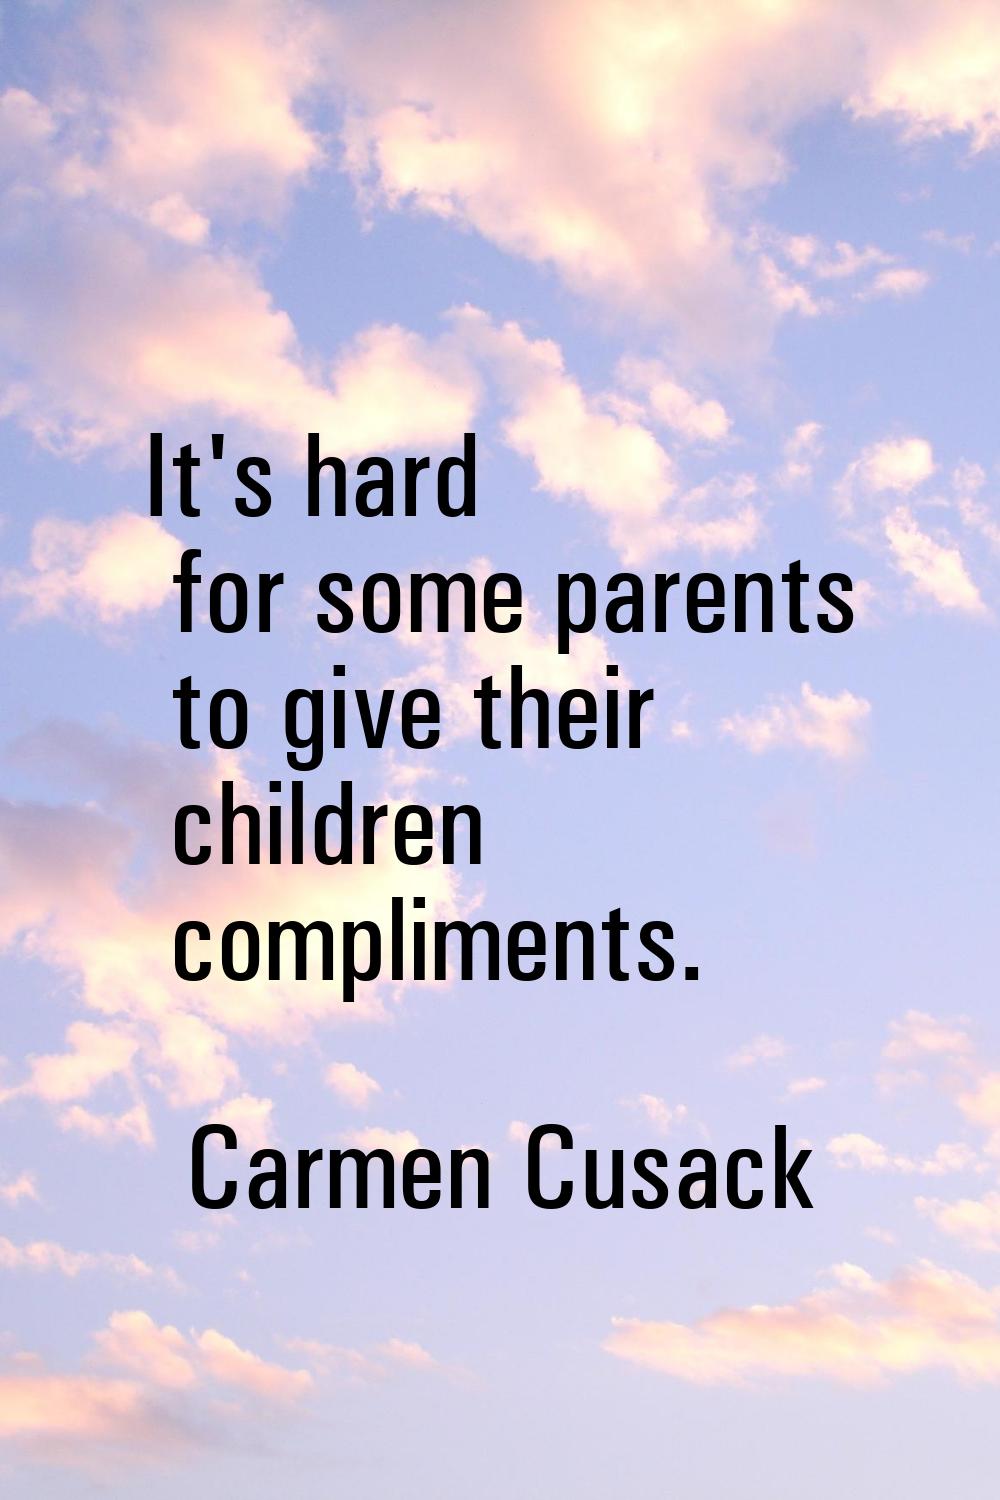 It's hard for some parents to give their children compliments.